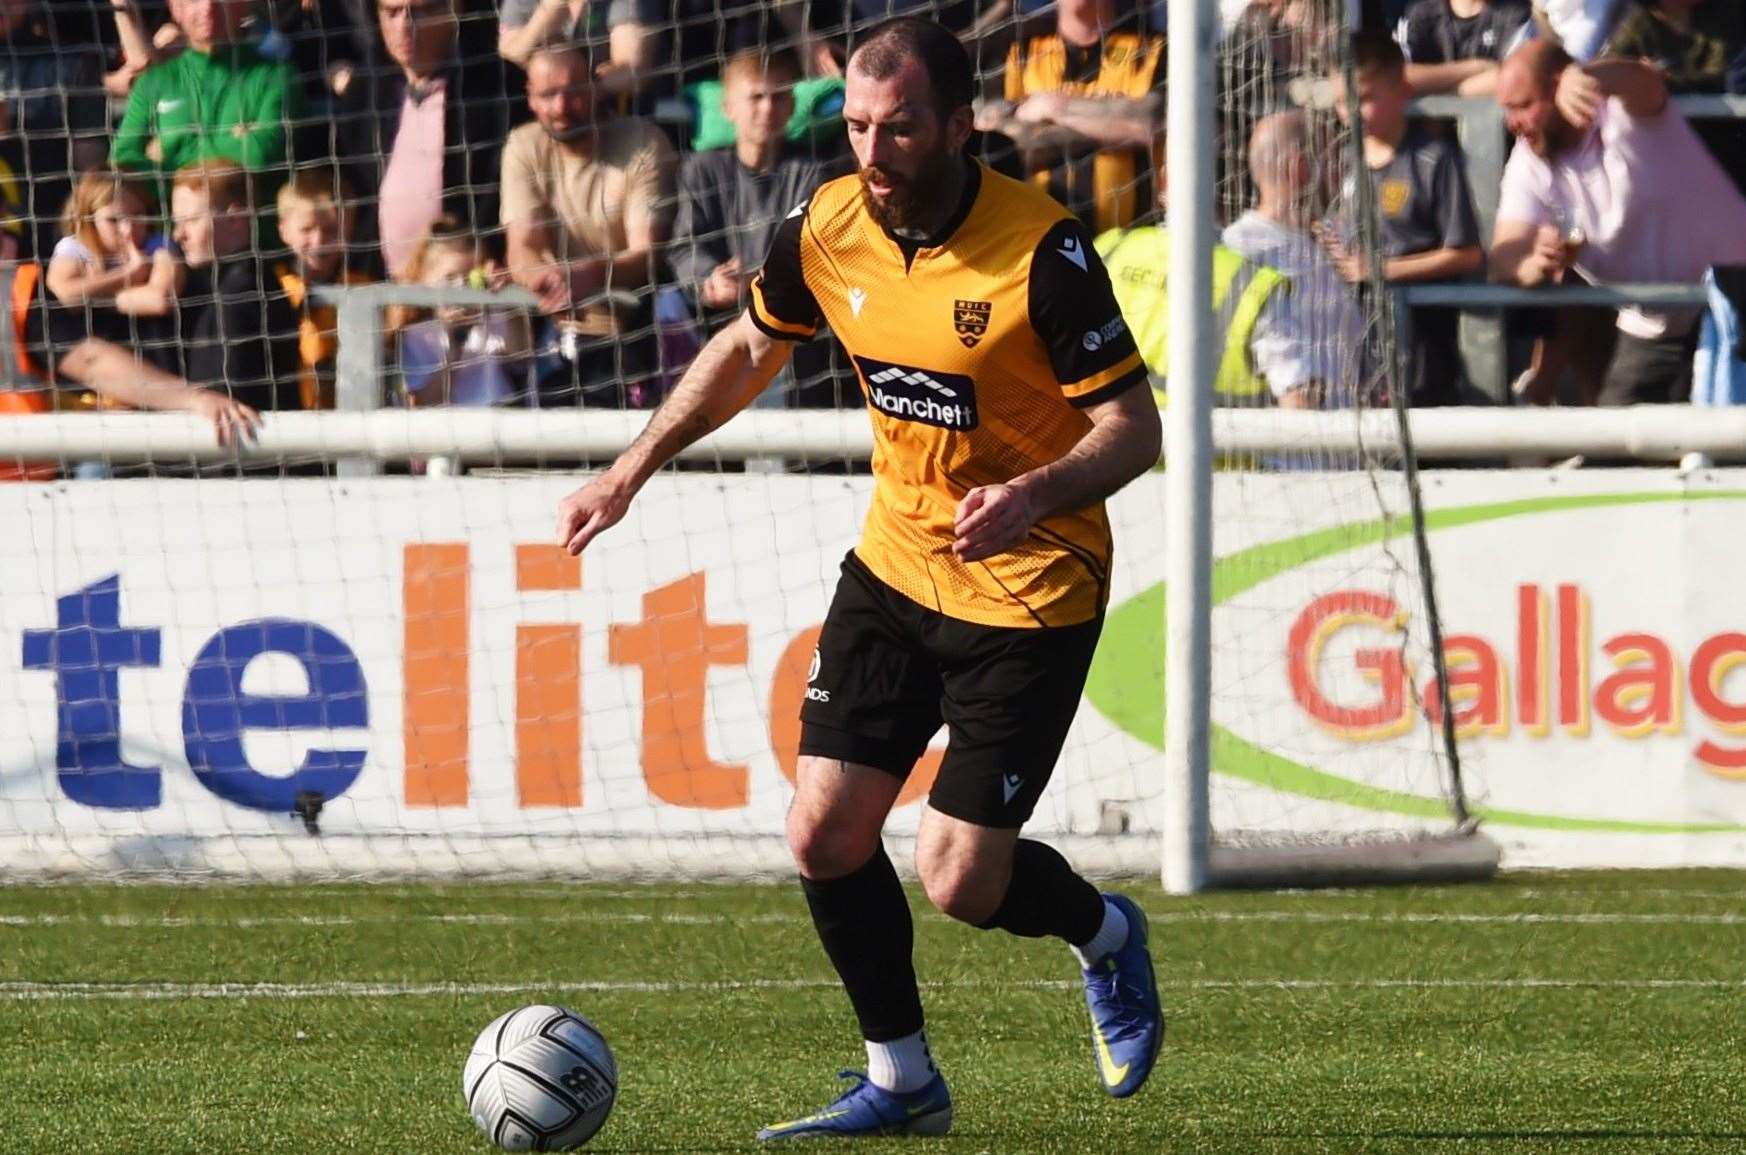 Former Maidstone defender Joe Ellul scored on his Sittingbourne debut in a draw with Sevenoaks. Picture: Steve Terrell